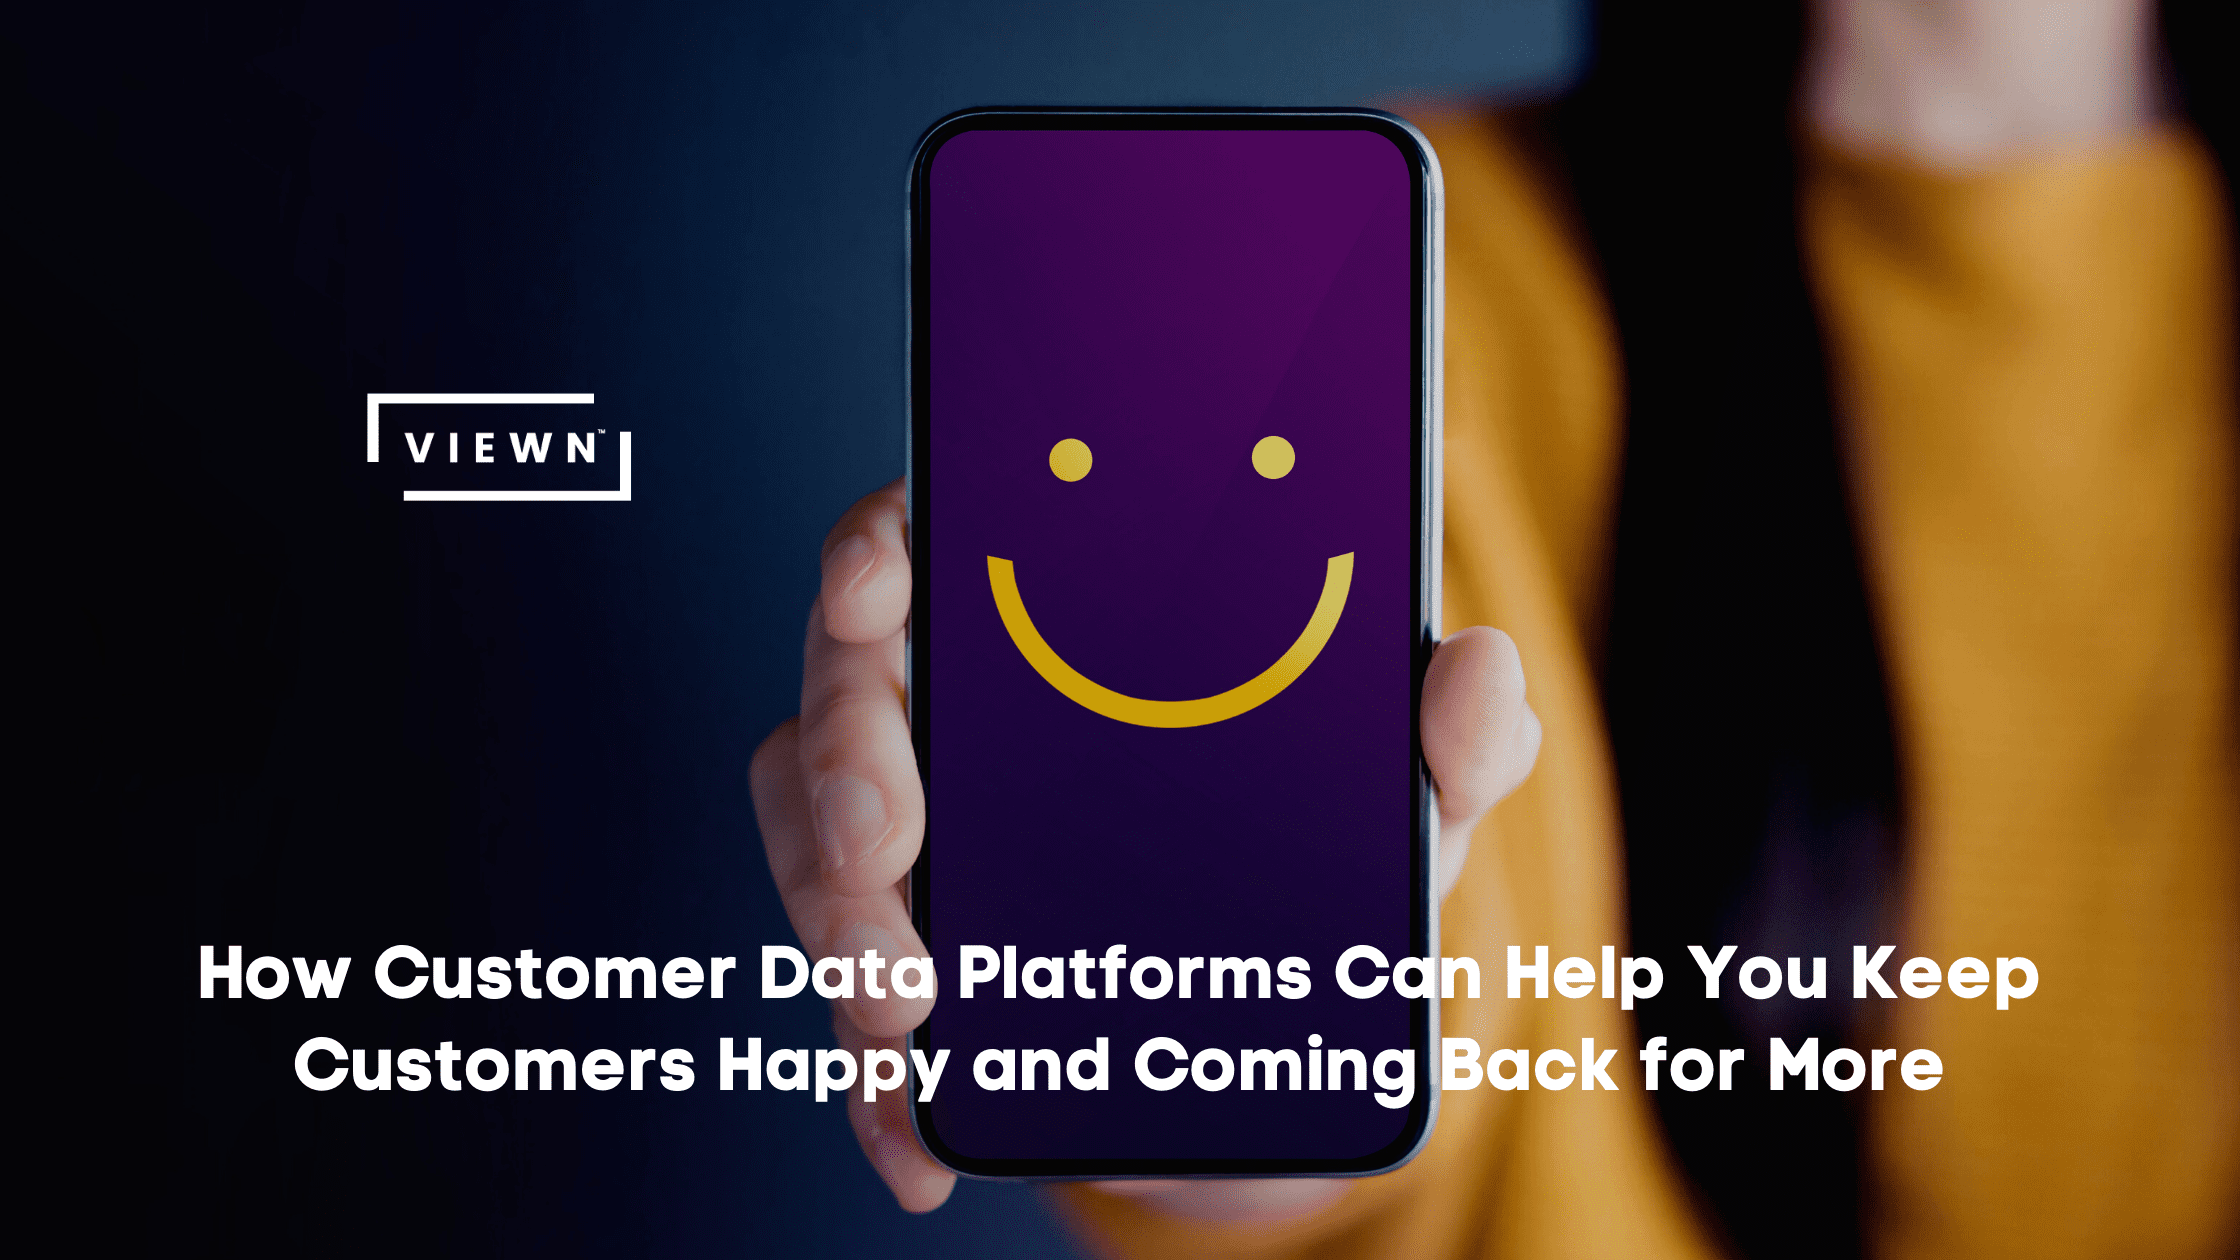 How CDPs help keep customers happy and coming back